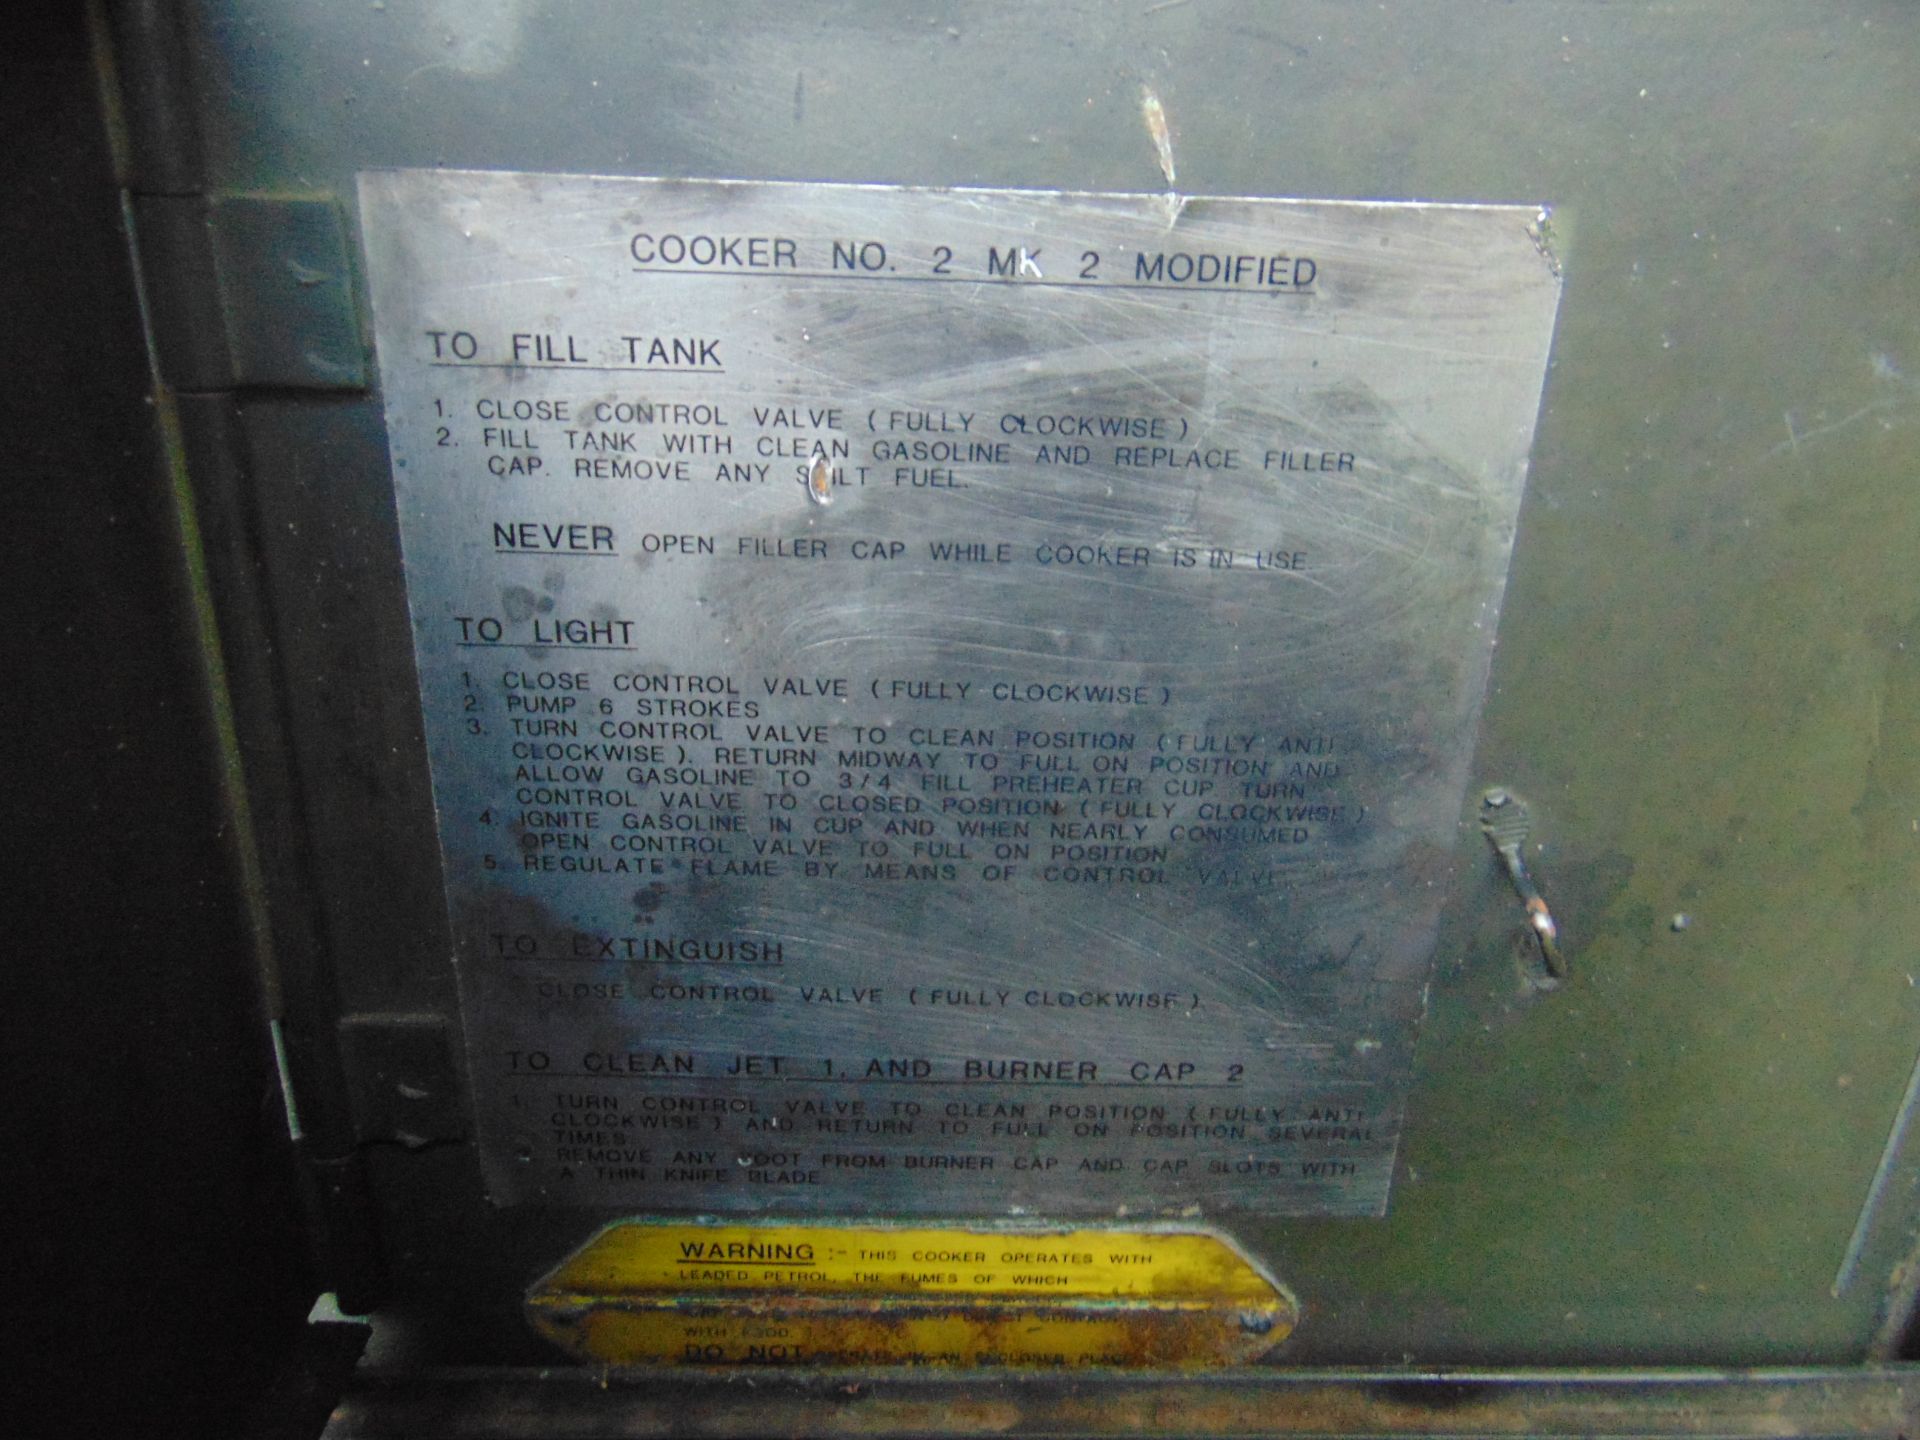 British Army Cooker No 2 MK 2 Modified - Image 5 of 5